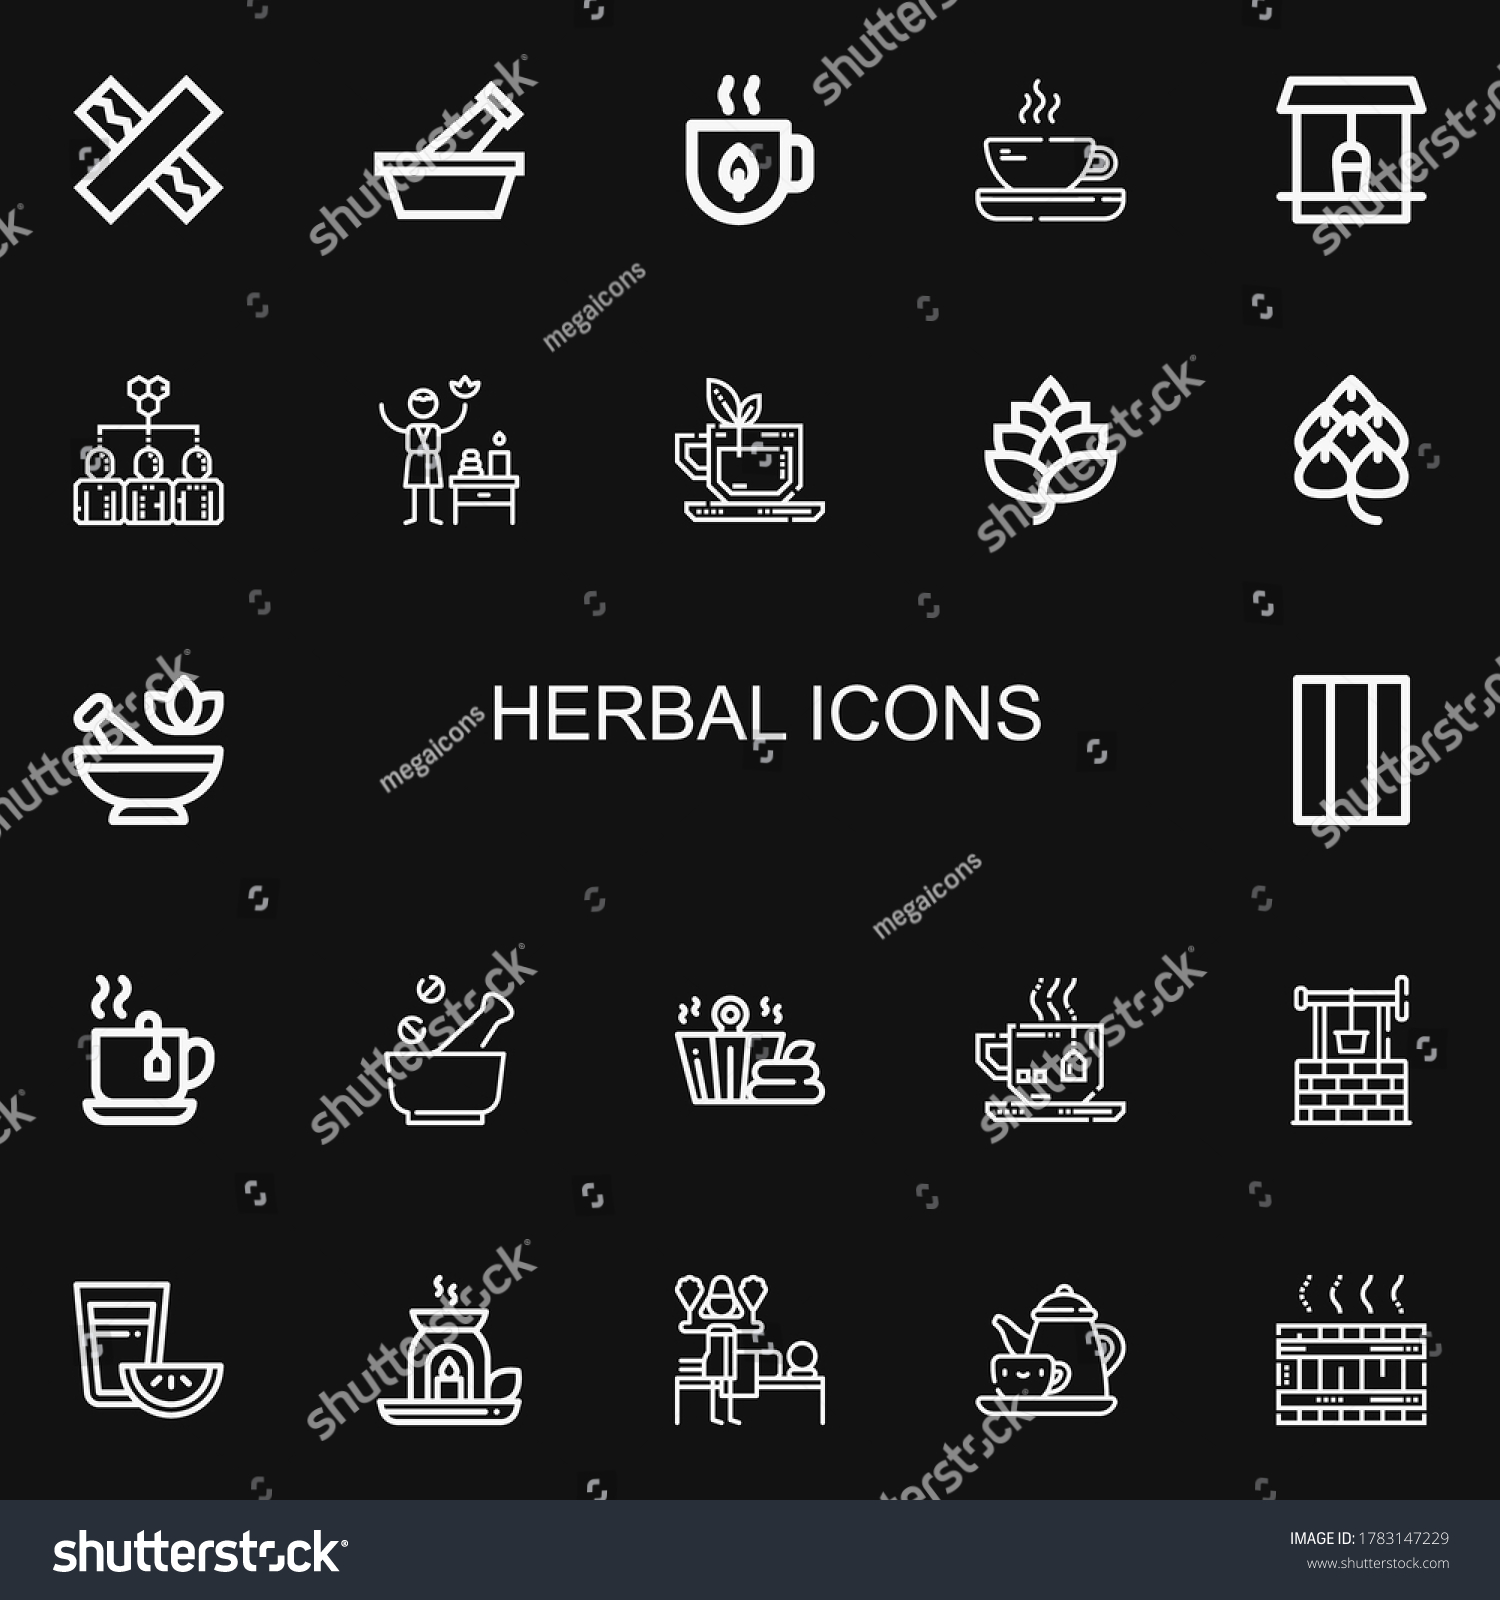 SVG of Editable 22 herbal icons for web and mobile. Set of herbal included icons line Chewing gum, Mortar, Tea, Well, Hive, Spa, Hop, Sauna, Essential oil, Massage on black background svg